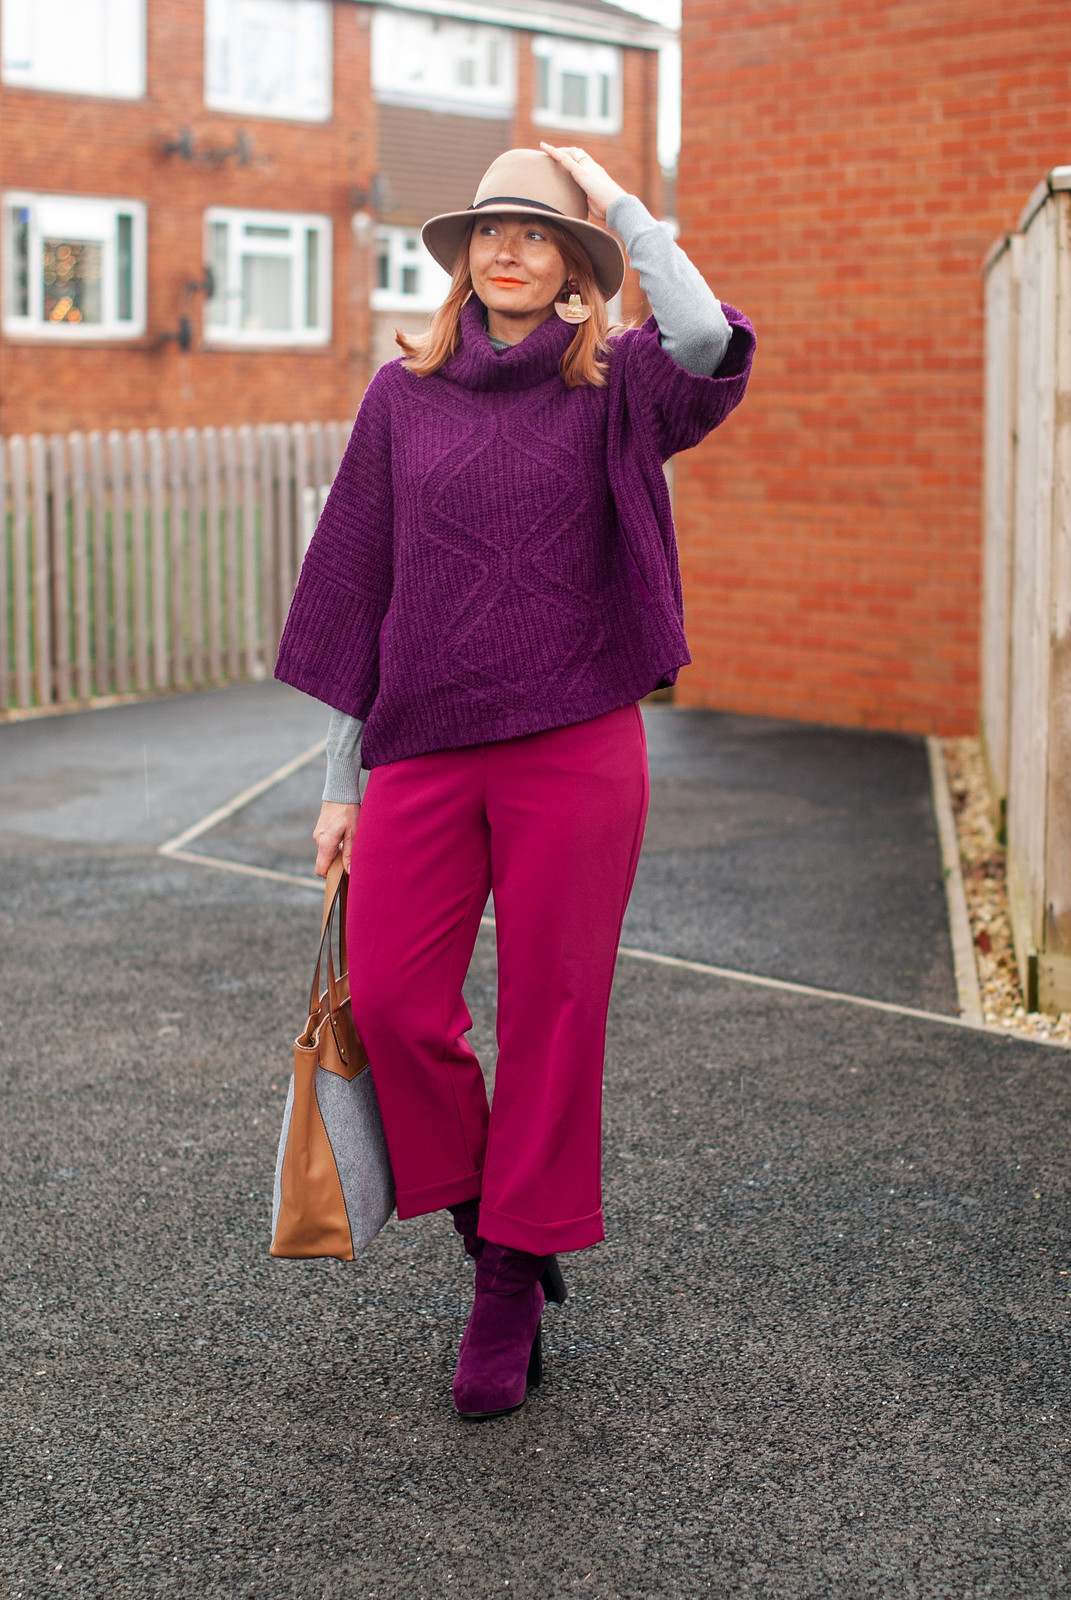 Wearing Head to Toe Berry Tones in Winter | Not Dressed As Lamb